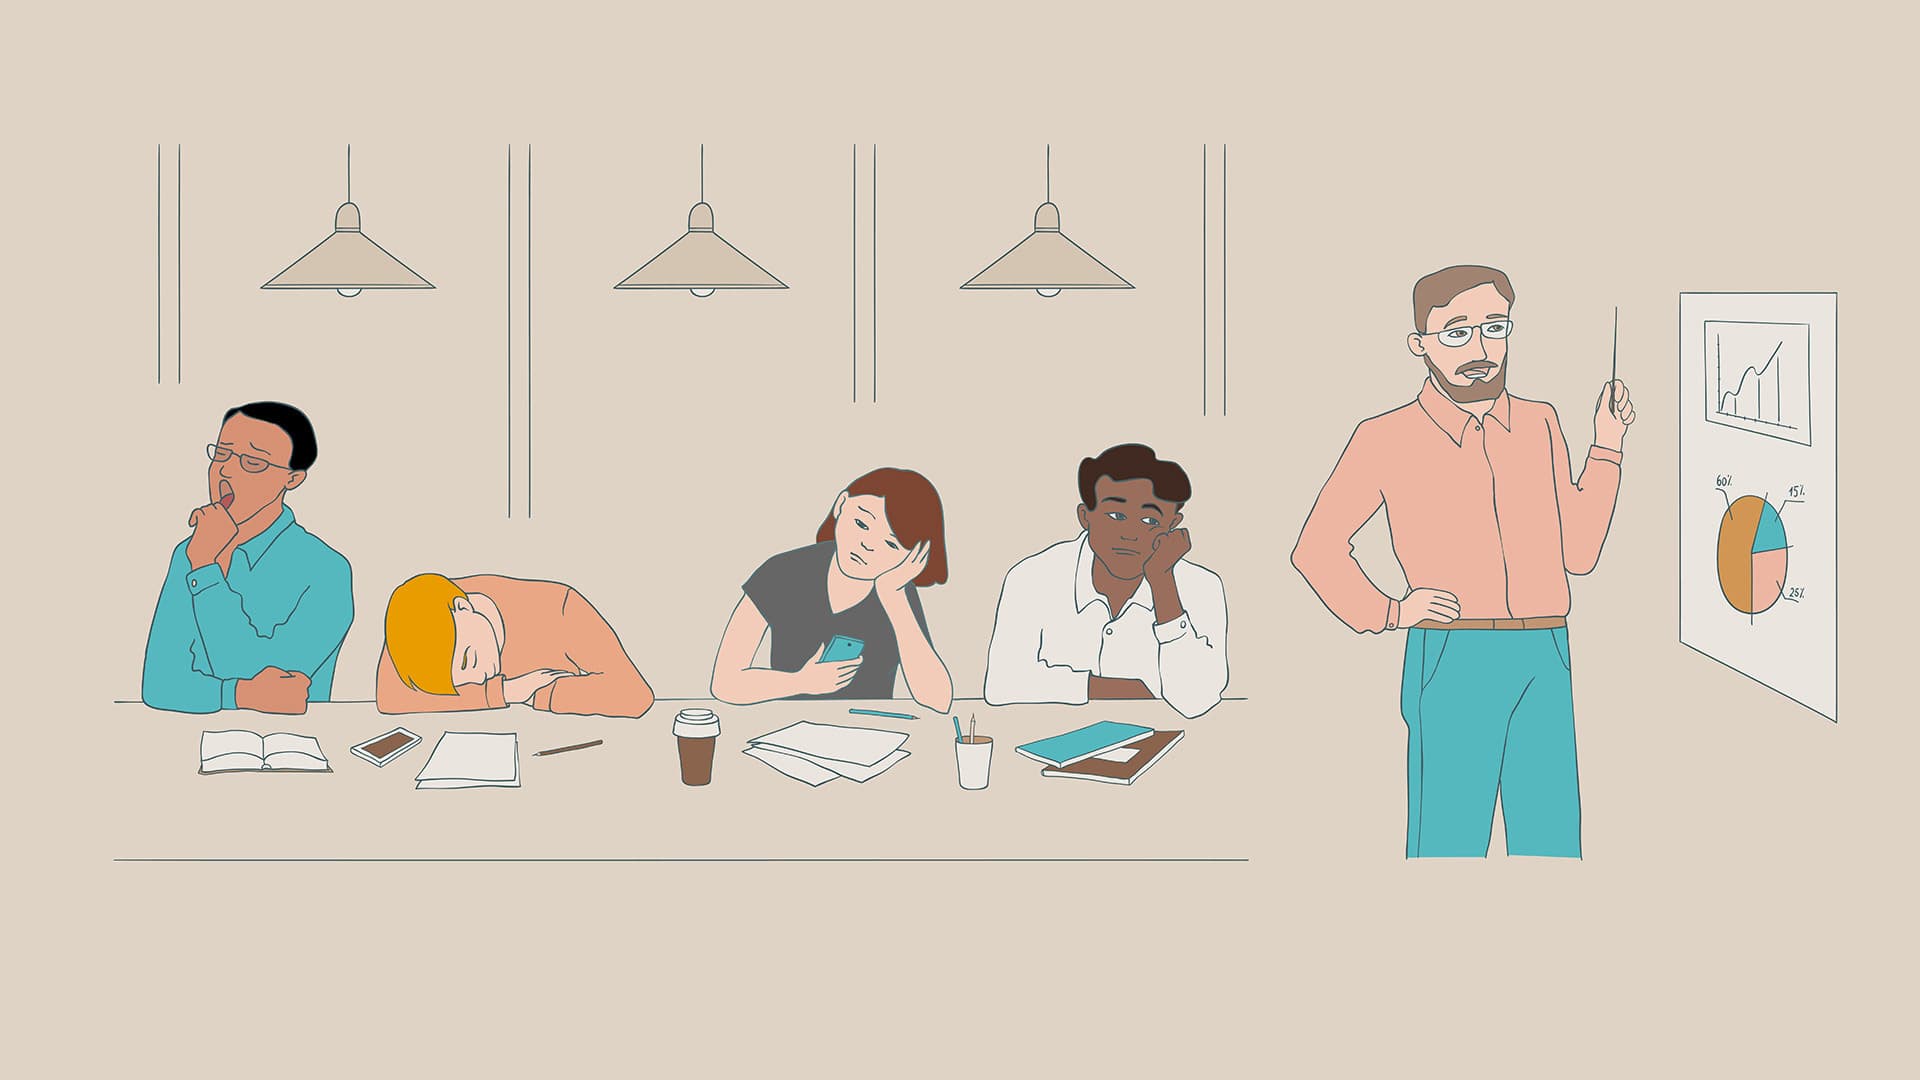 Illustration of bored meeting participants